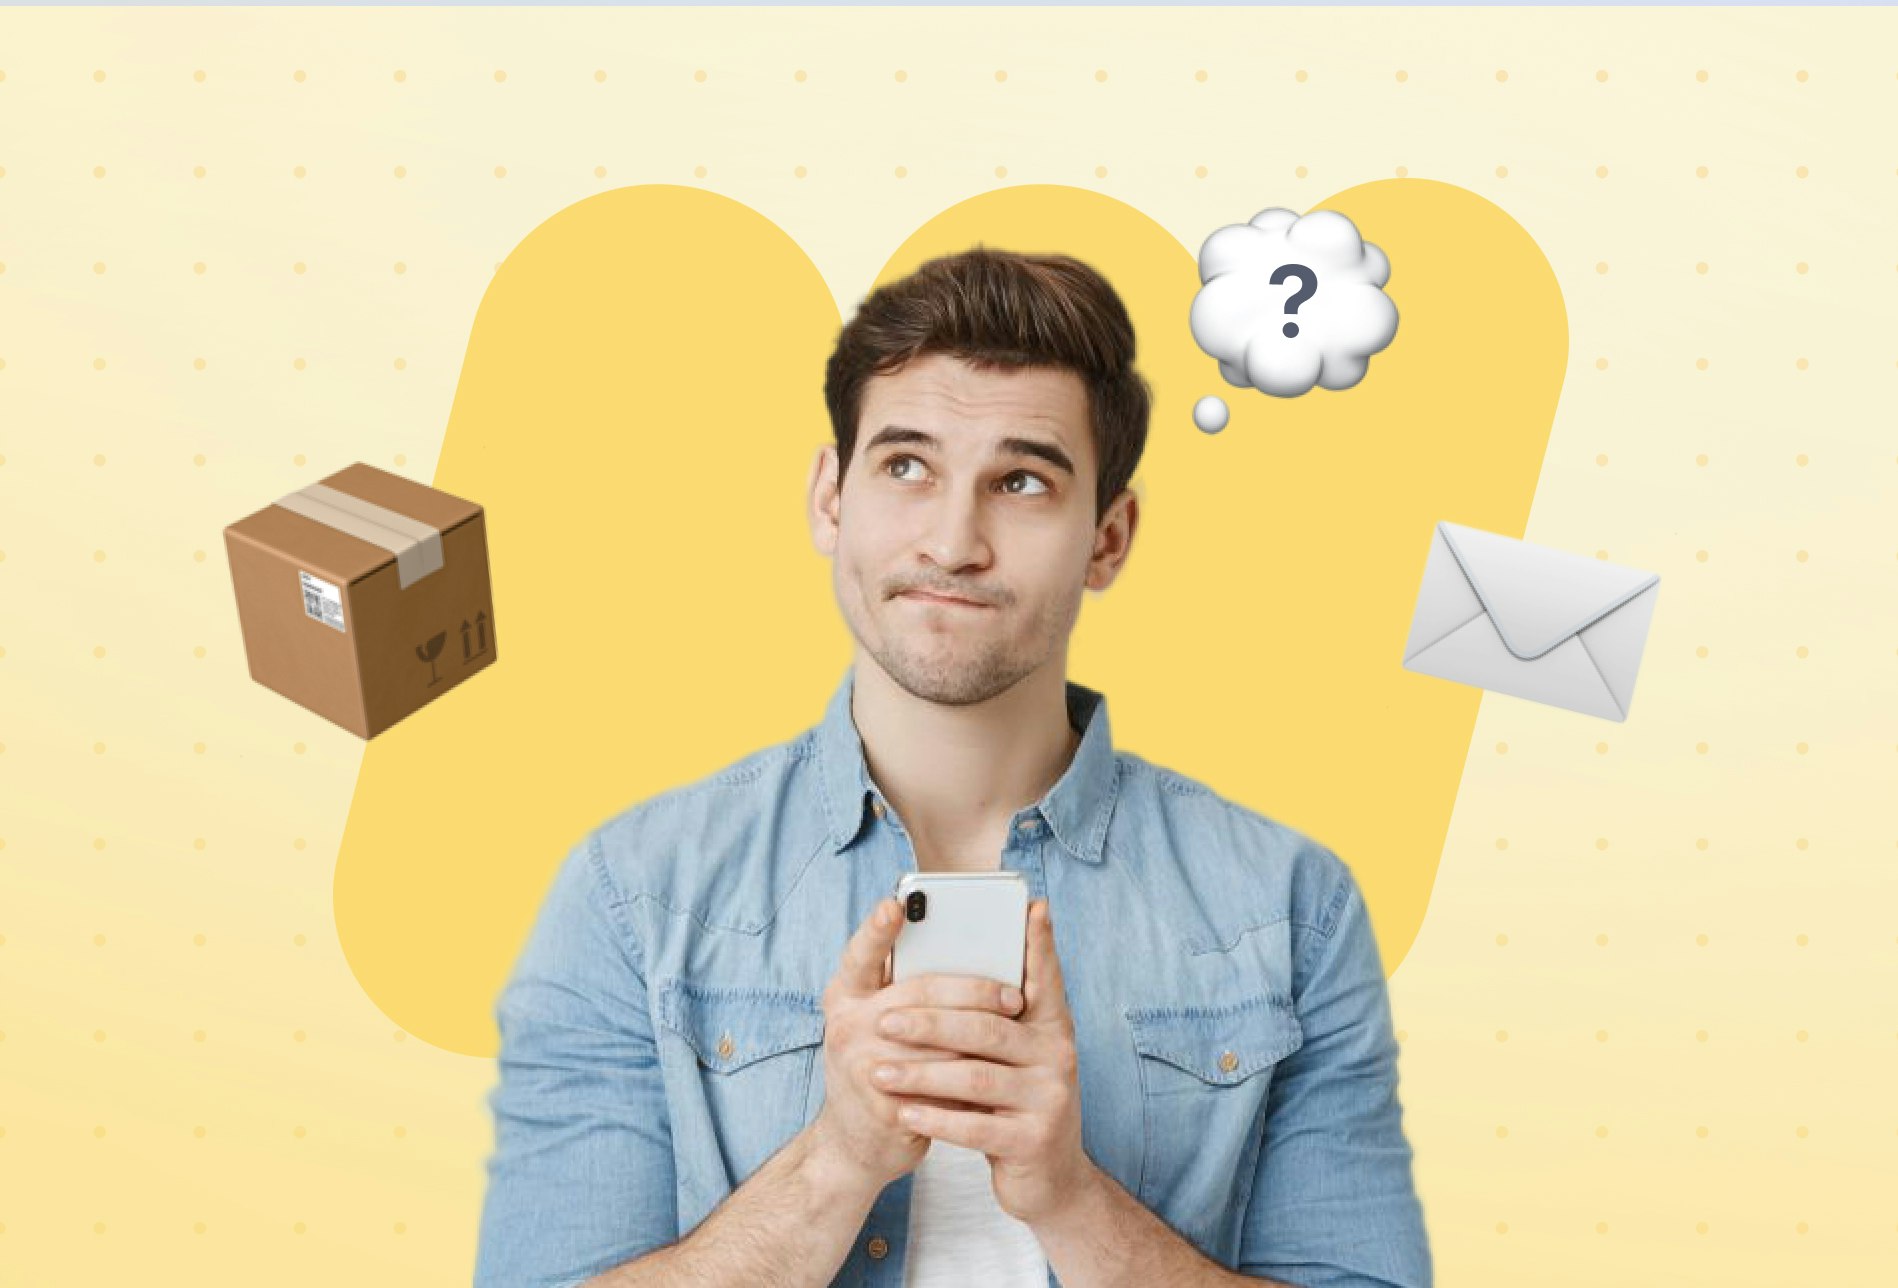 White man in a blue shirt holding a mobile phone and thinking with a thought bubble above his head and a box and letter in the background.